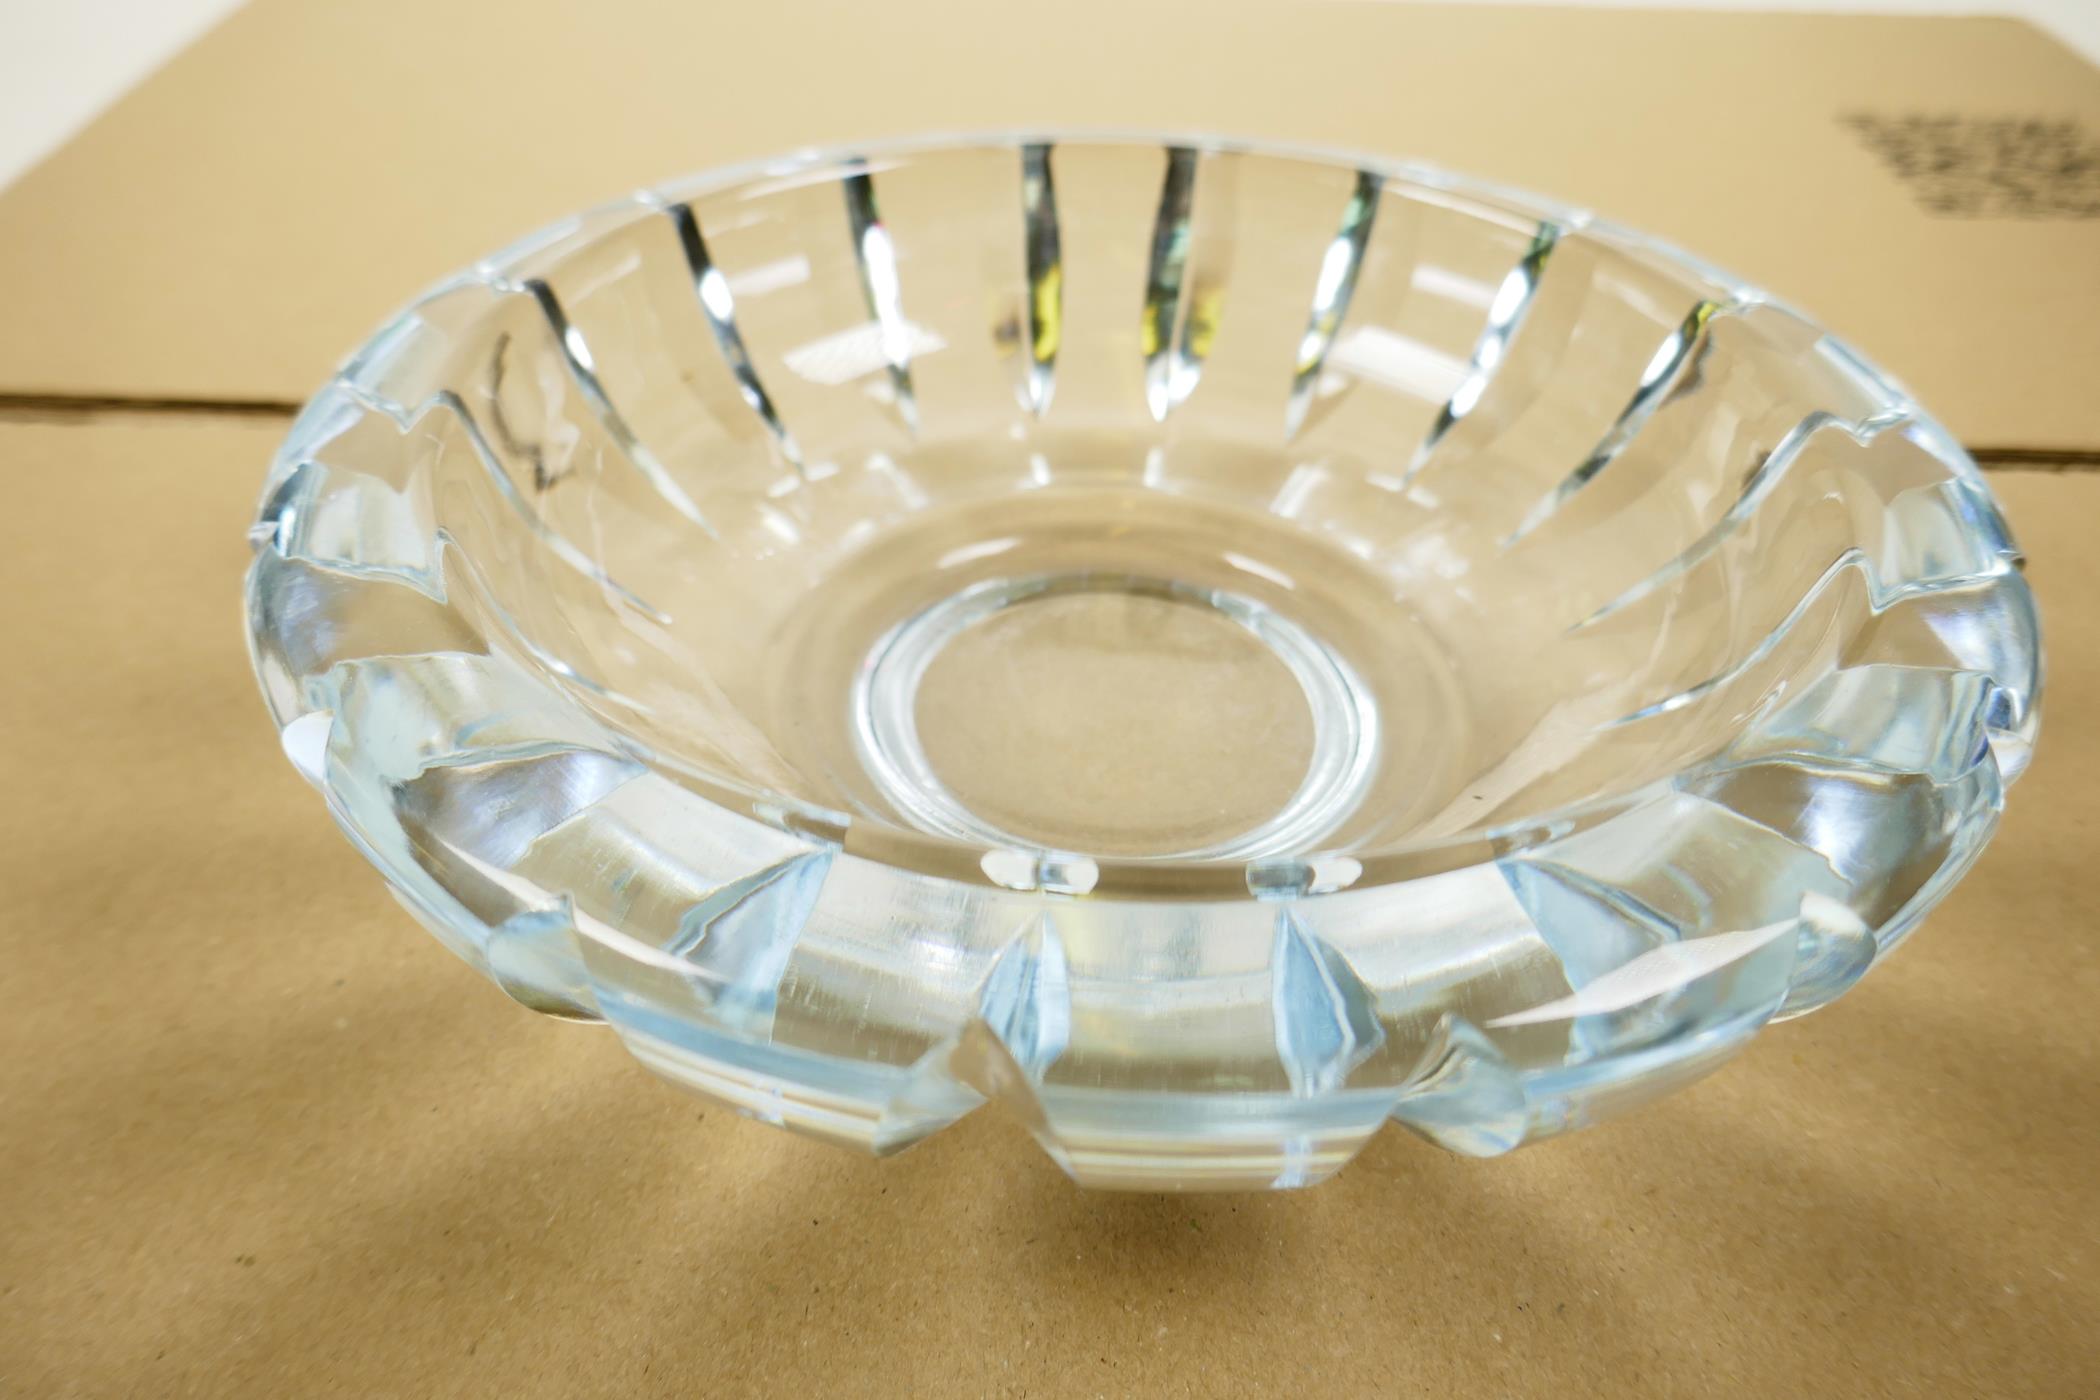 An Orrefors cut glass shallow bowl, 8½" diameter - Image 2 of 2